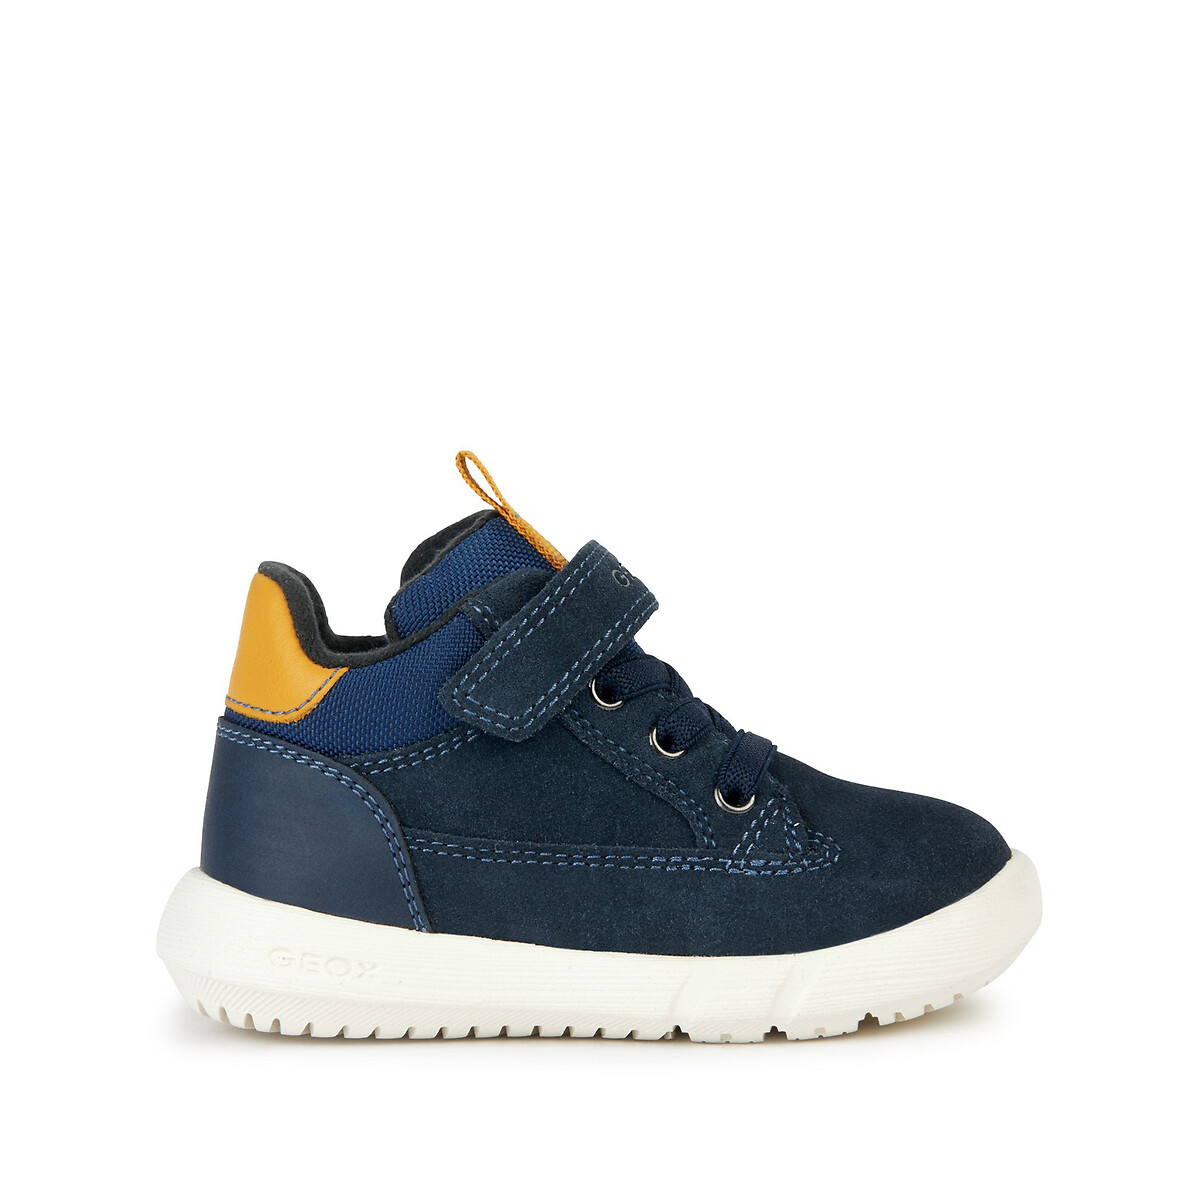 Kids Hyroo Suede High Top Trainers with Touch ’n’ Close Fastening